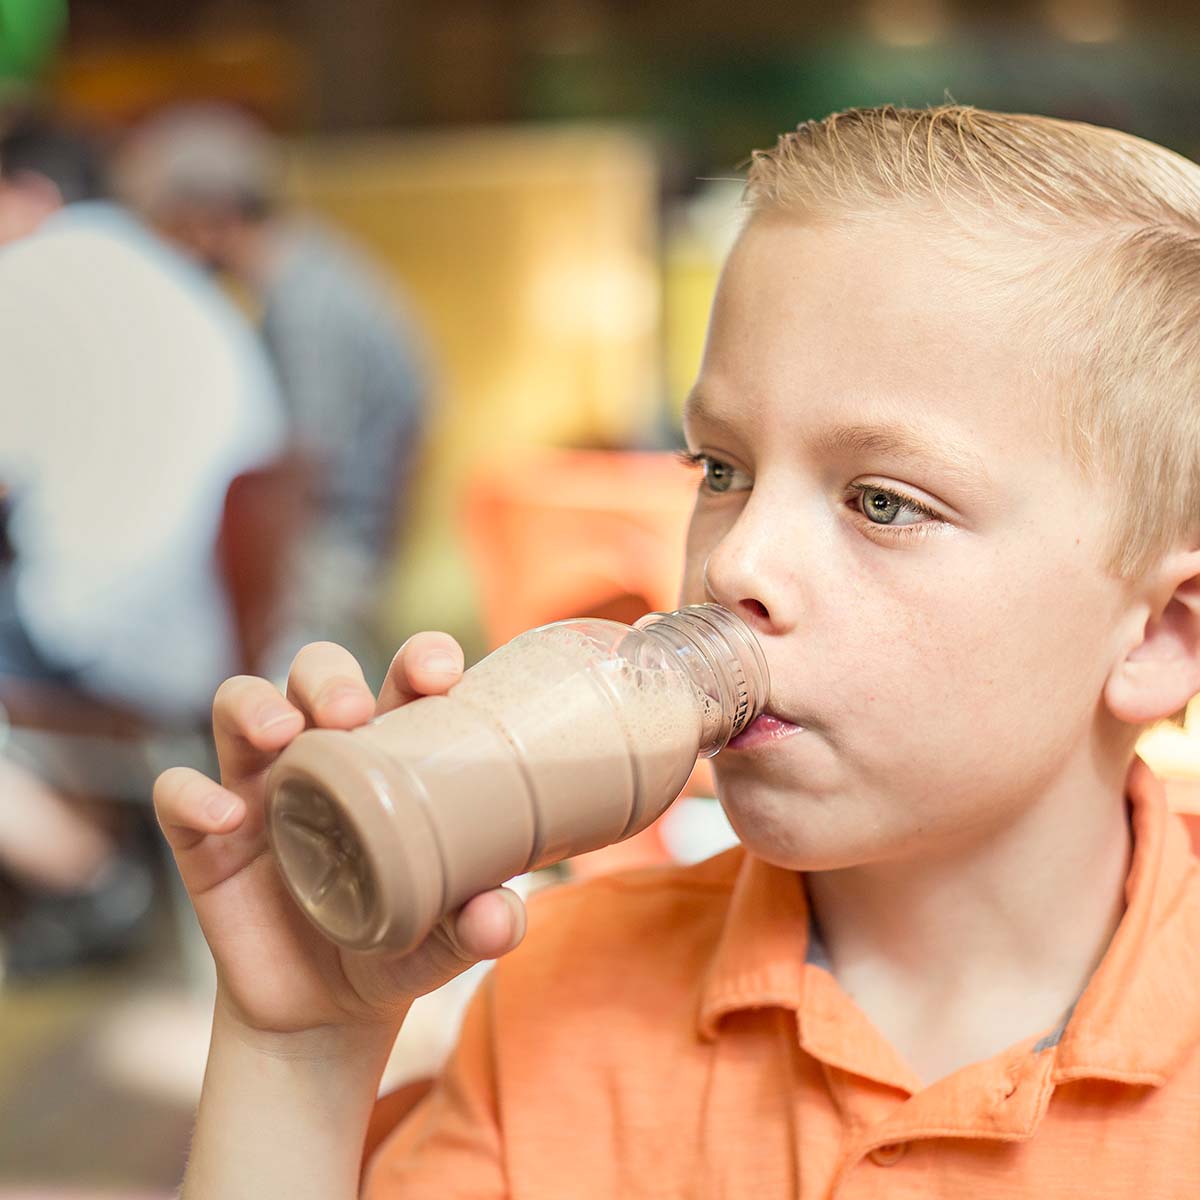 Flavored Milk in Schools: 3 Things You Should Know